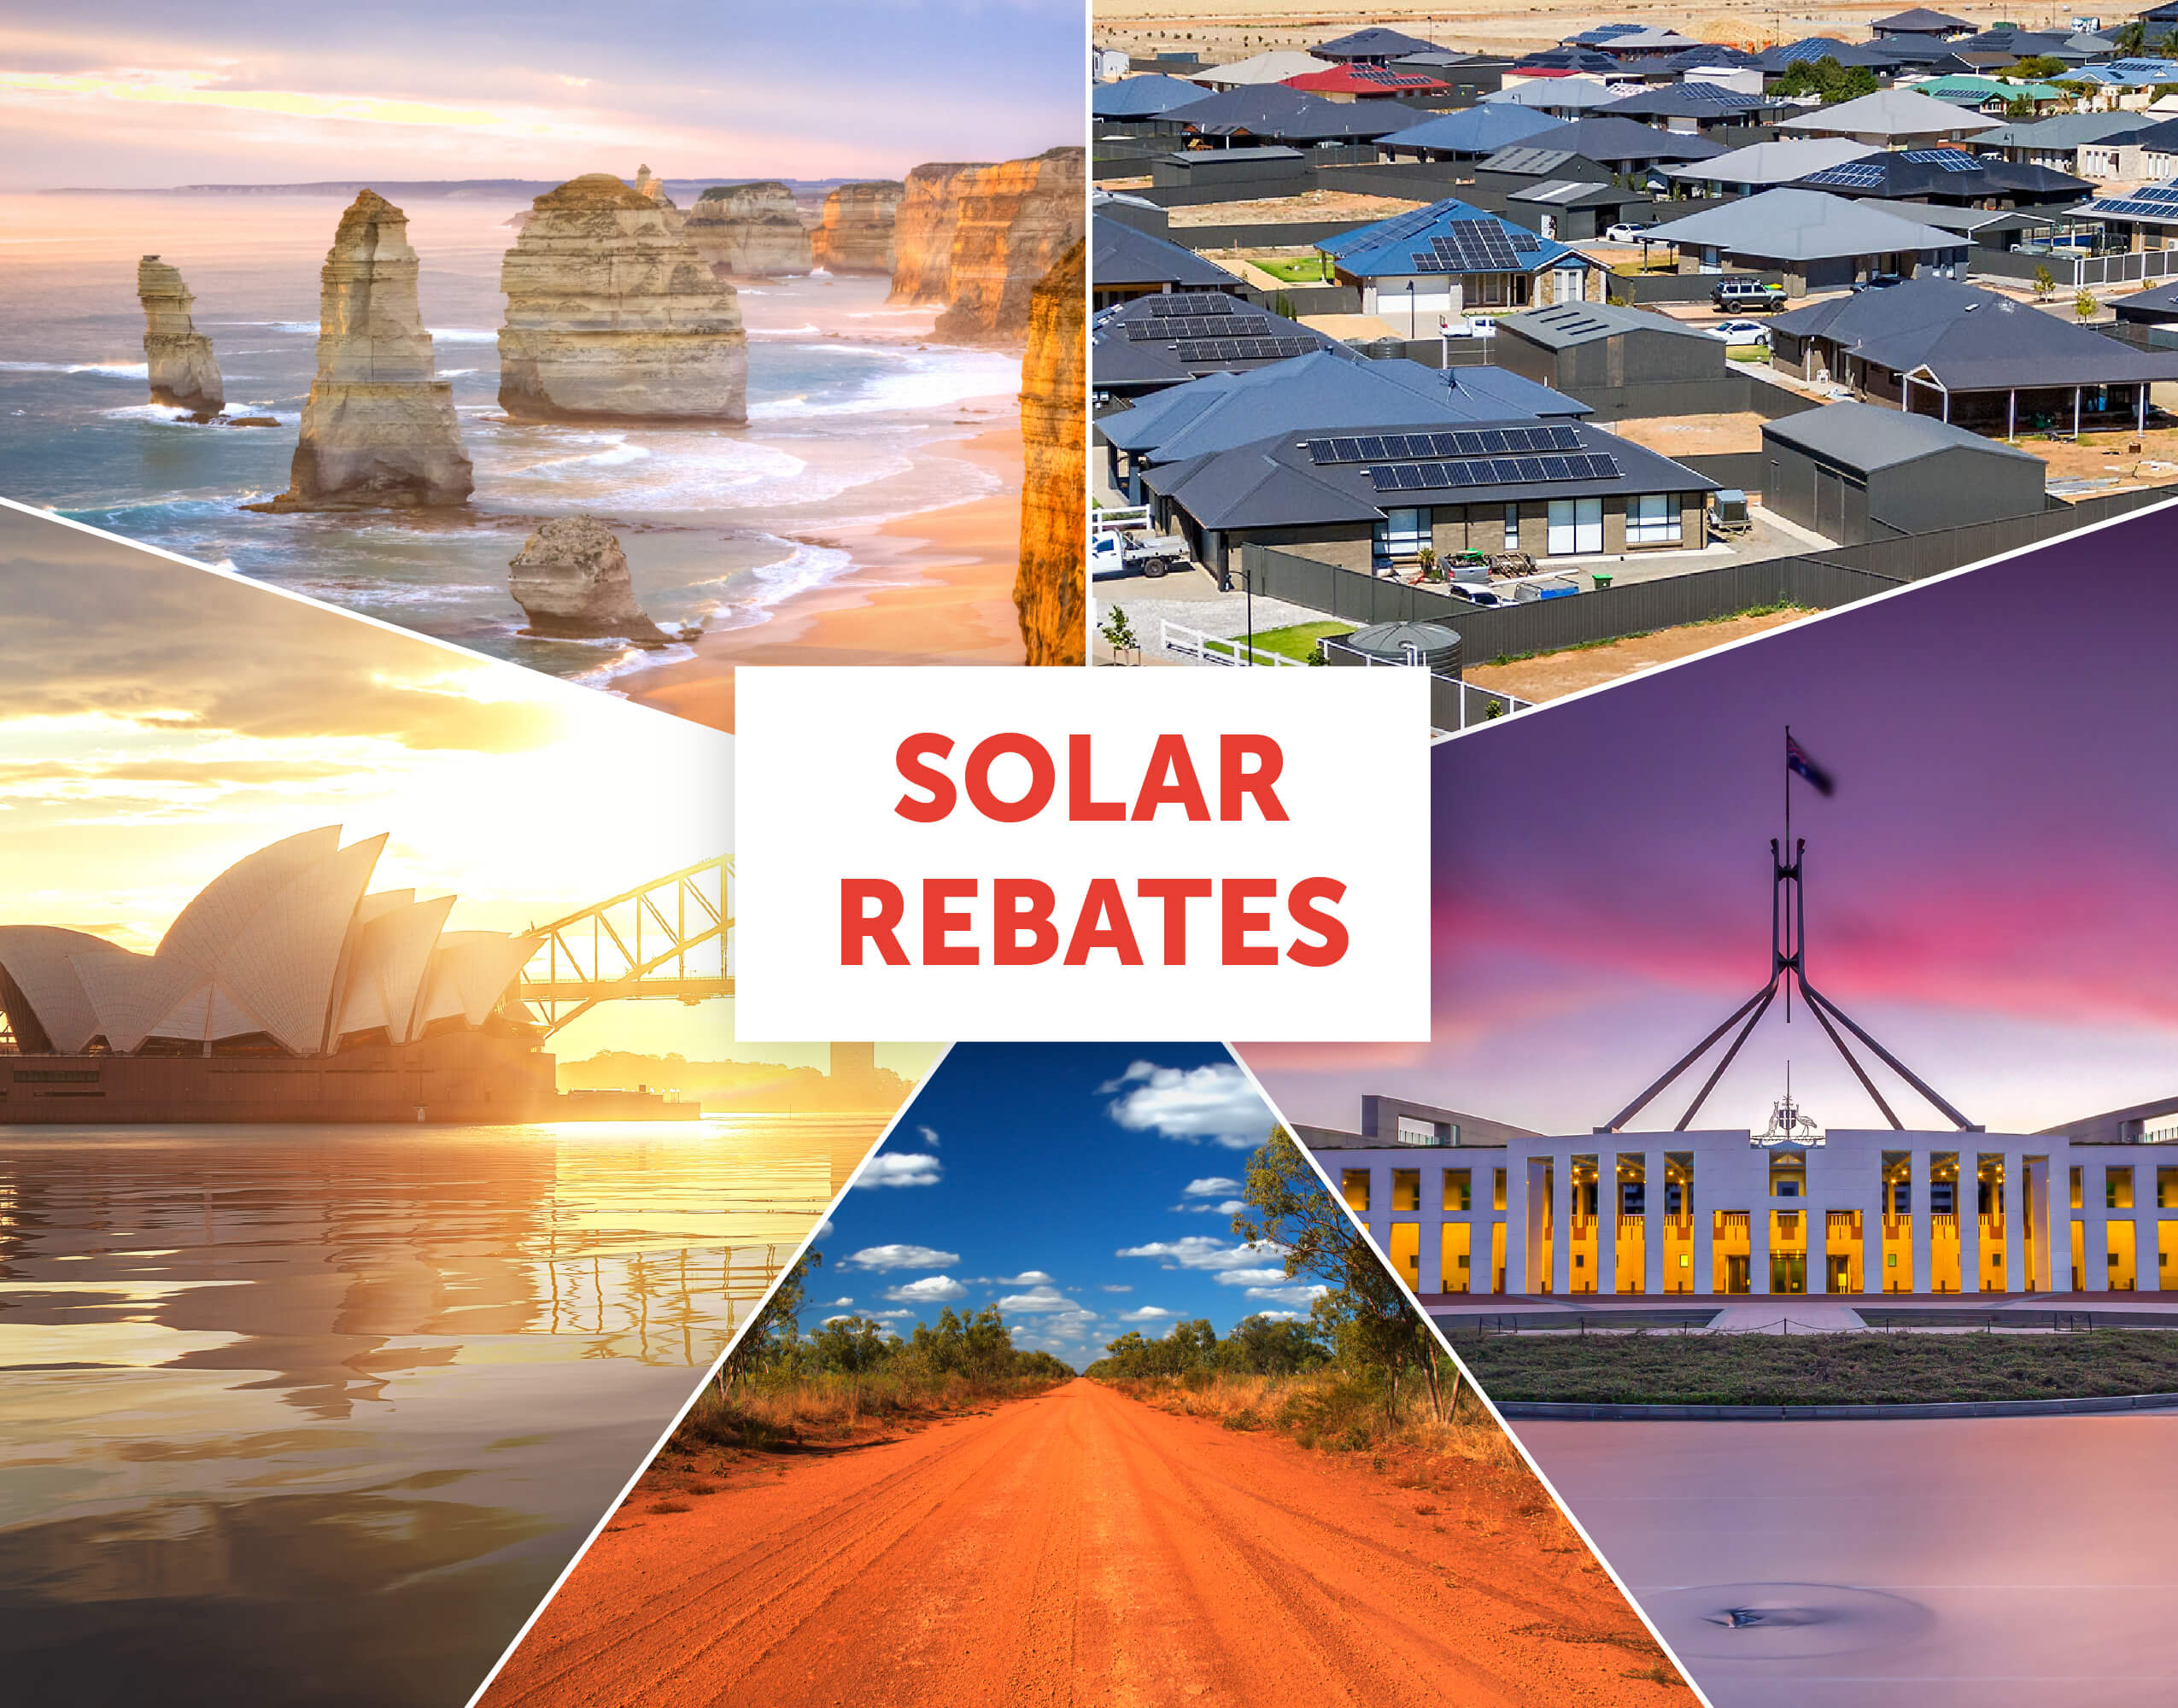 Multiple photos of Australian landmarks with the words "Solar Rebates" in the centre